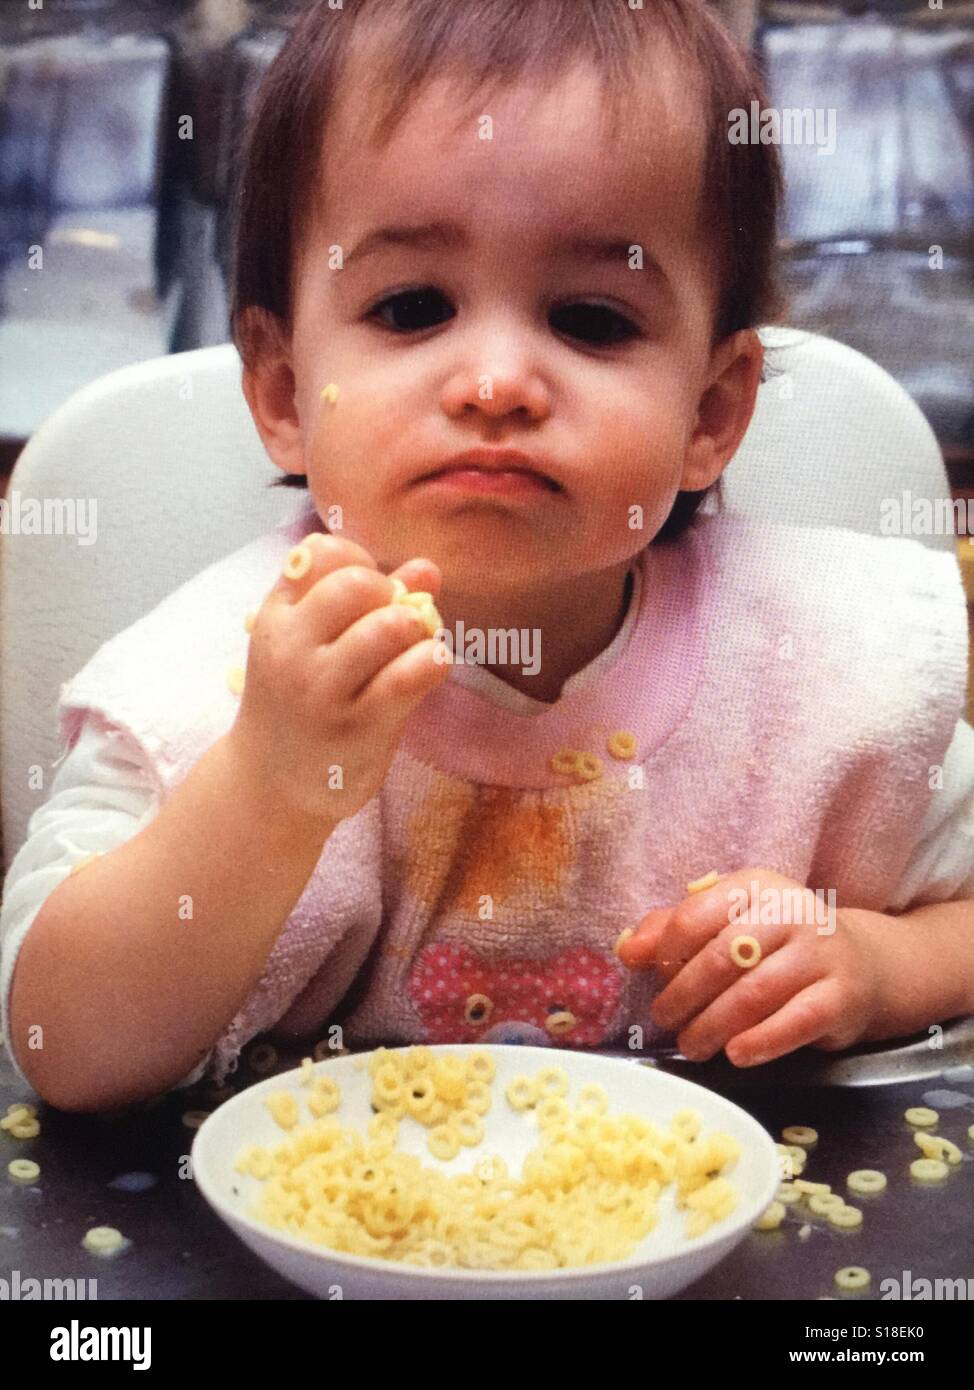 An infant girl in a high chair messily eating noodles Stock Photo